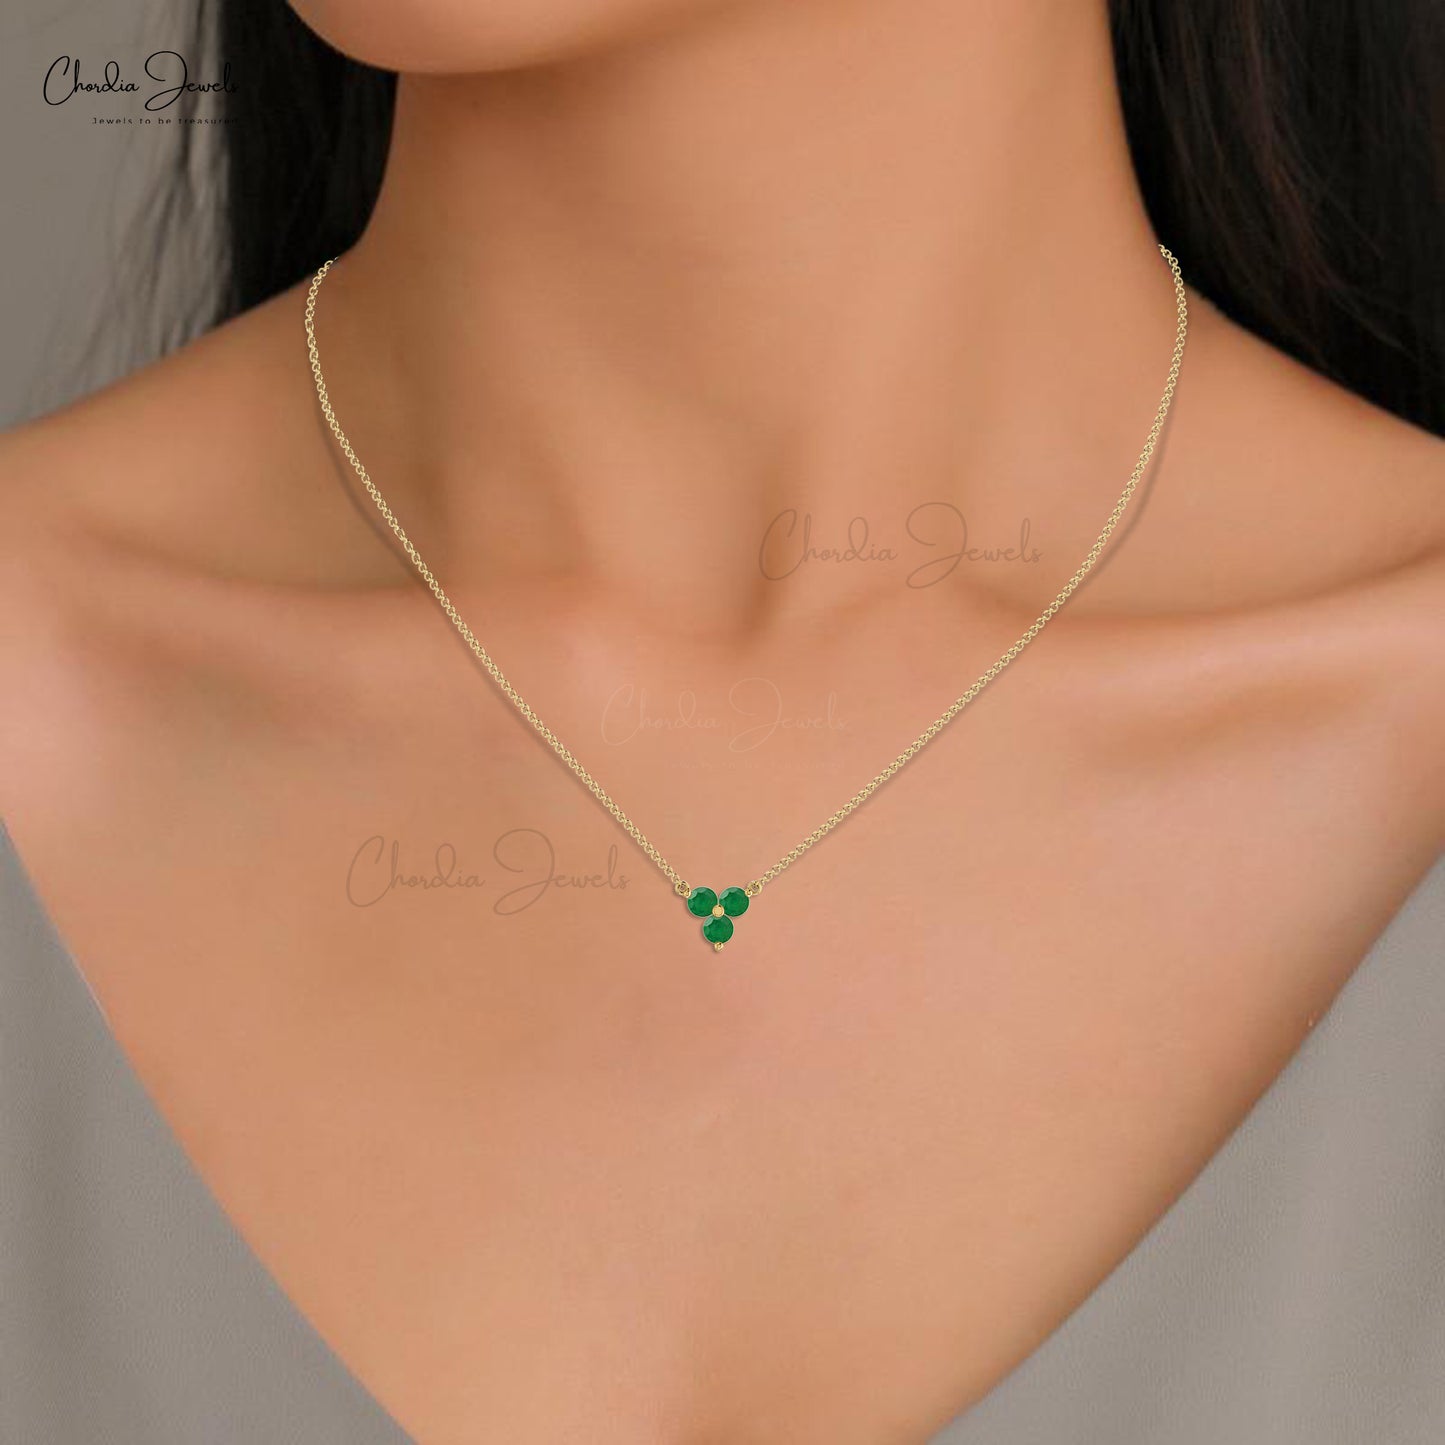 Trio Genuine Green Necklace Pendant Solitaire Charm  Necklace Three Stone Gemstone Pendant in 14k Real Gold Anniversary Gift For Women